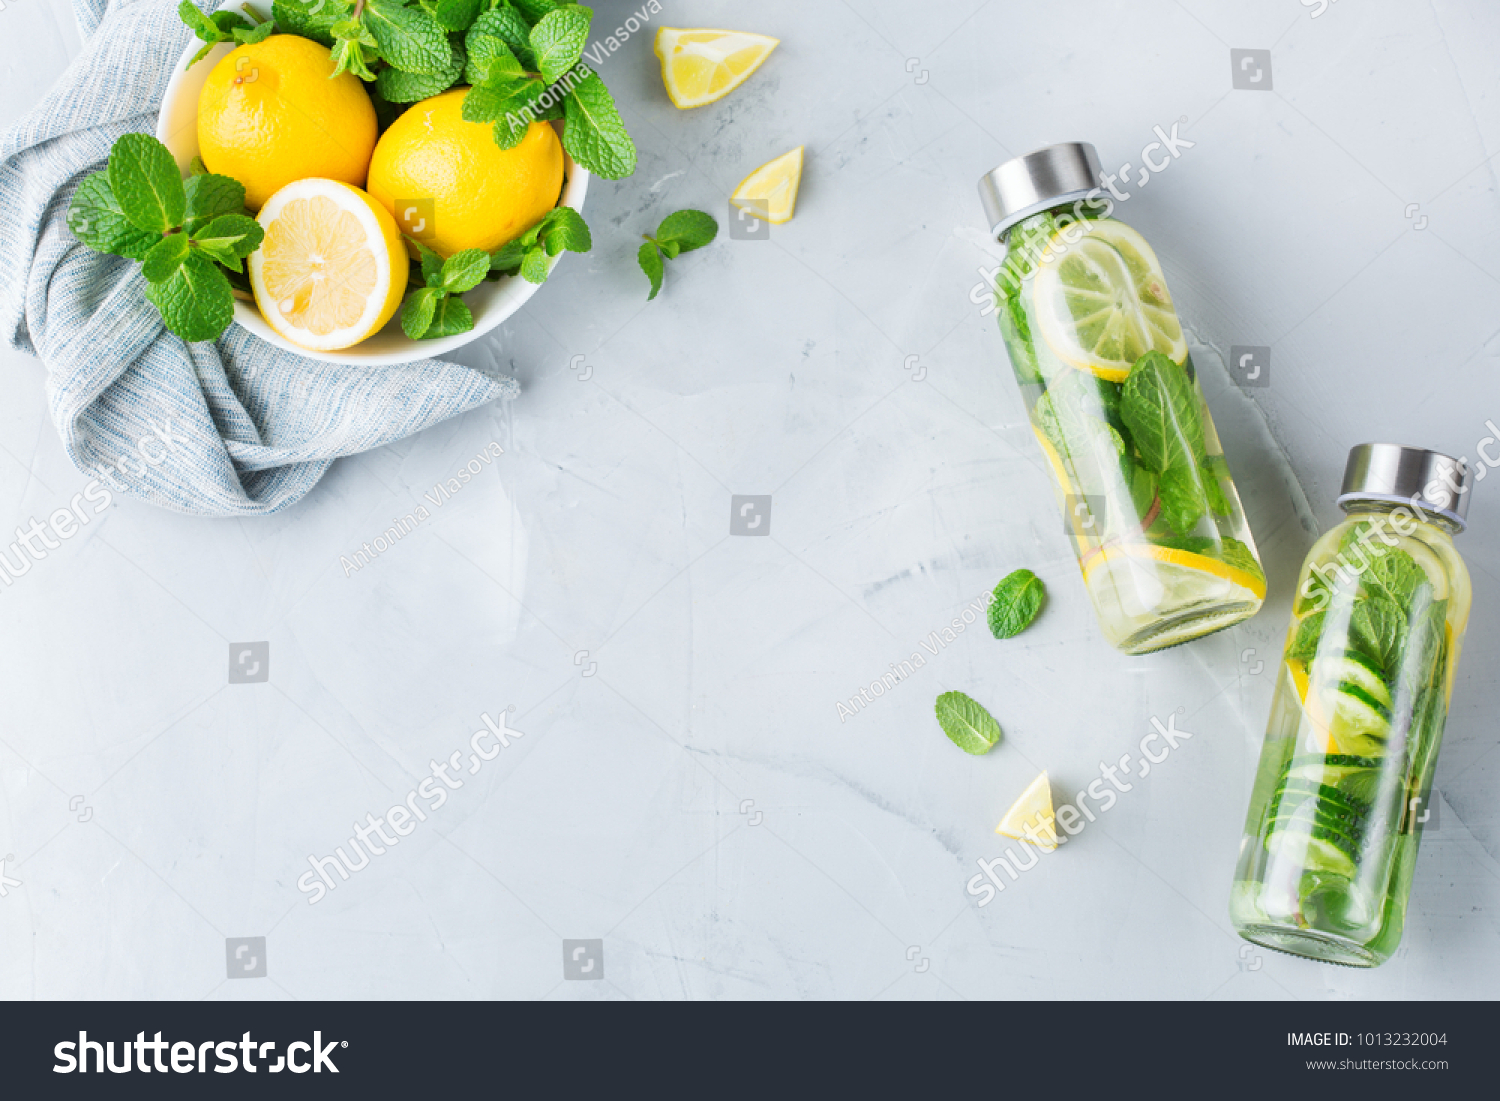 Health care, fitness, healthy nutrition diet concept. Fresh cool lemon cucumber mint infused water, cocktail, detox drink, lemonade in a glass jar. Light copy space top view flat lay background #1013232004